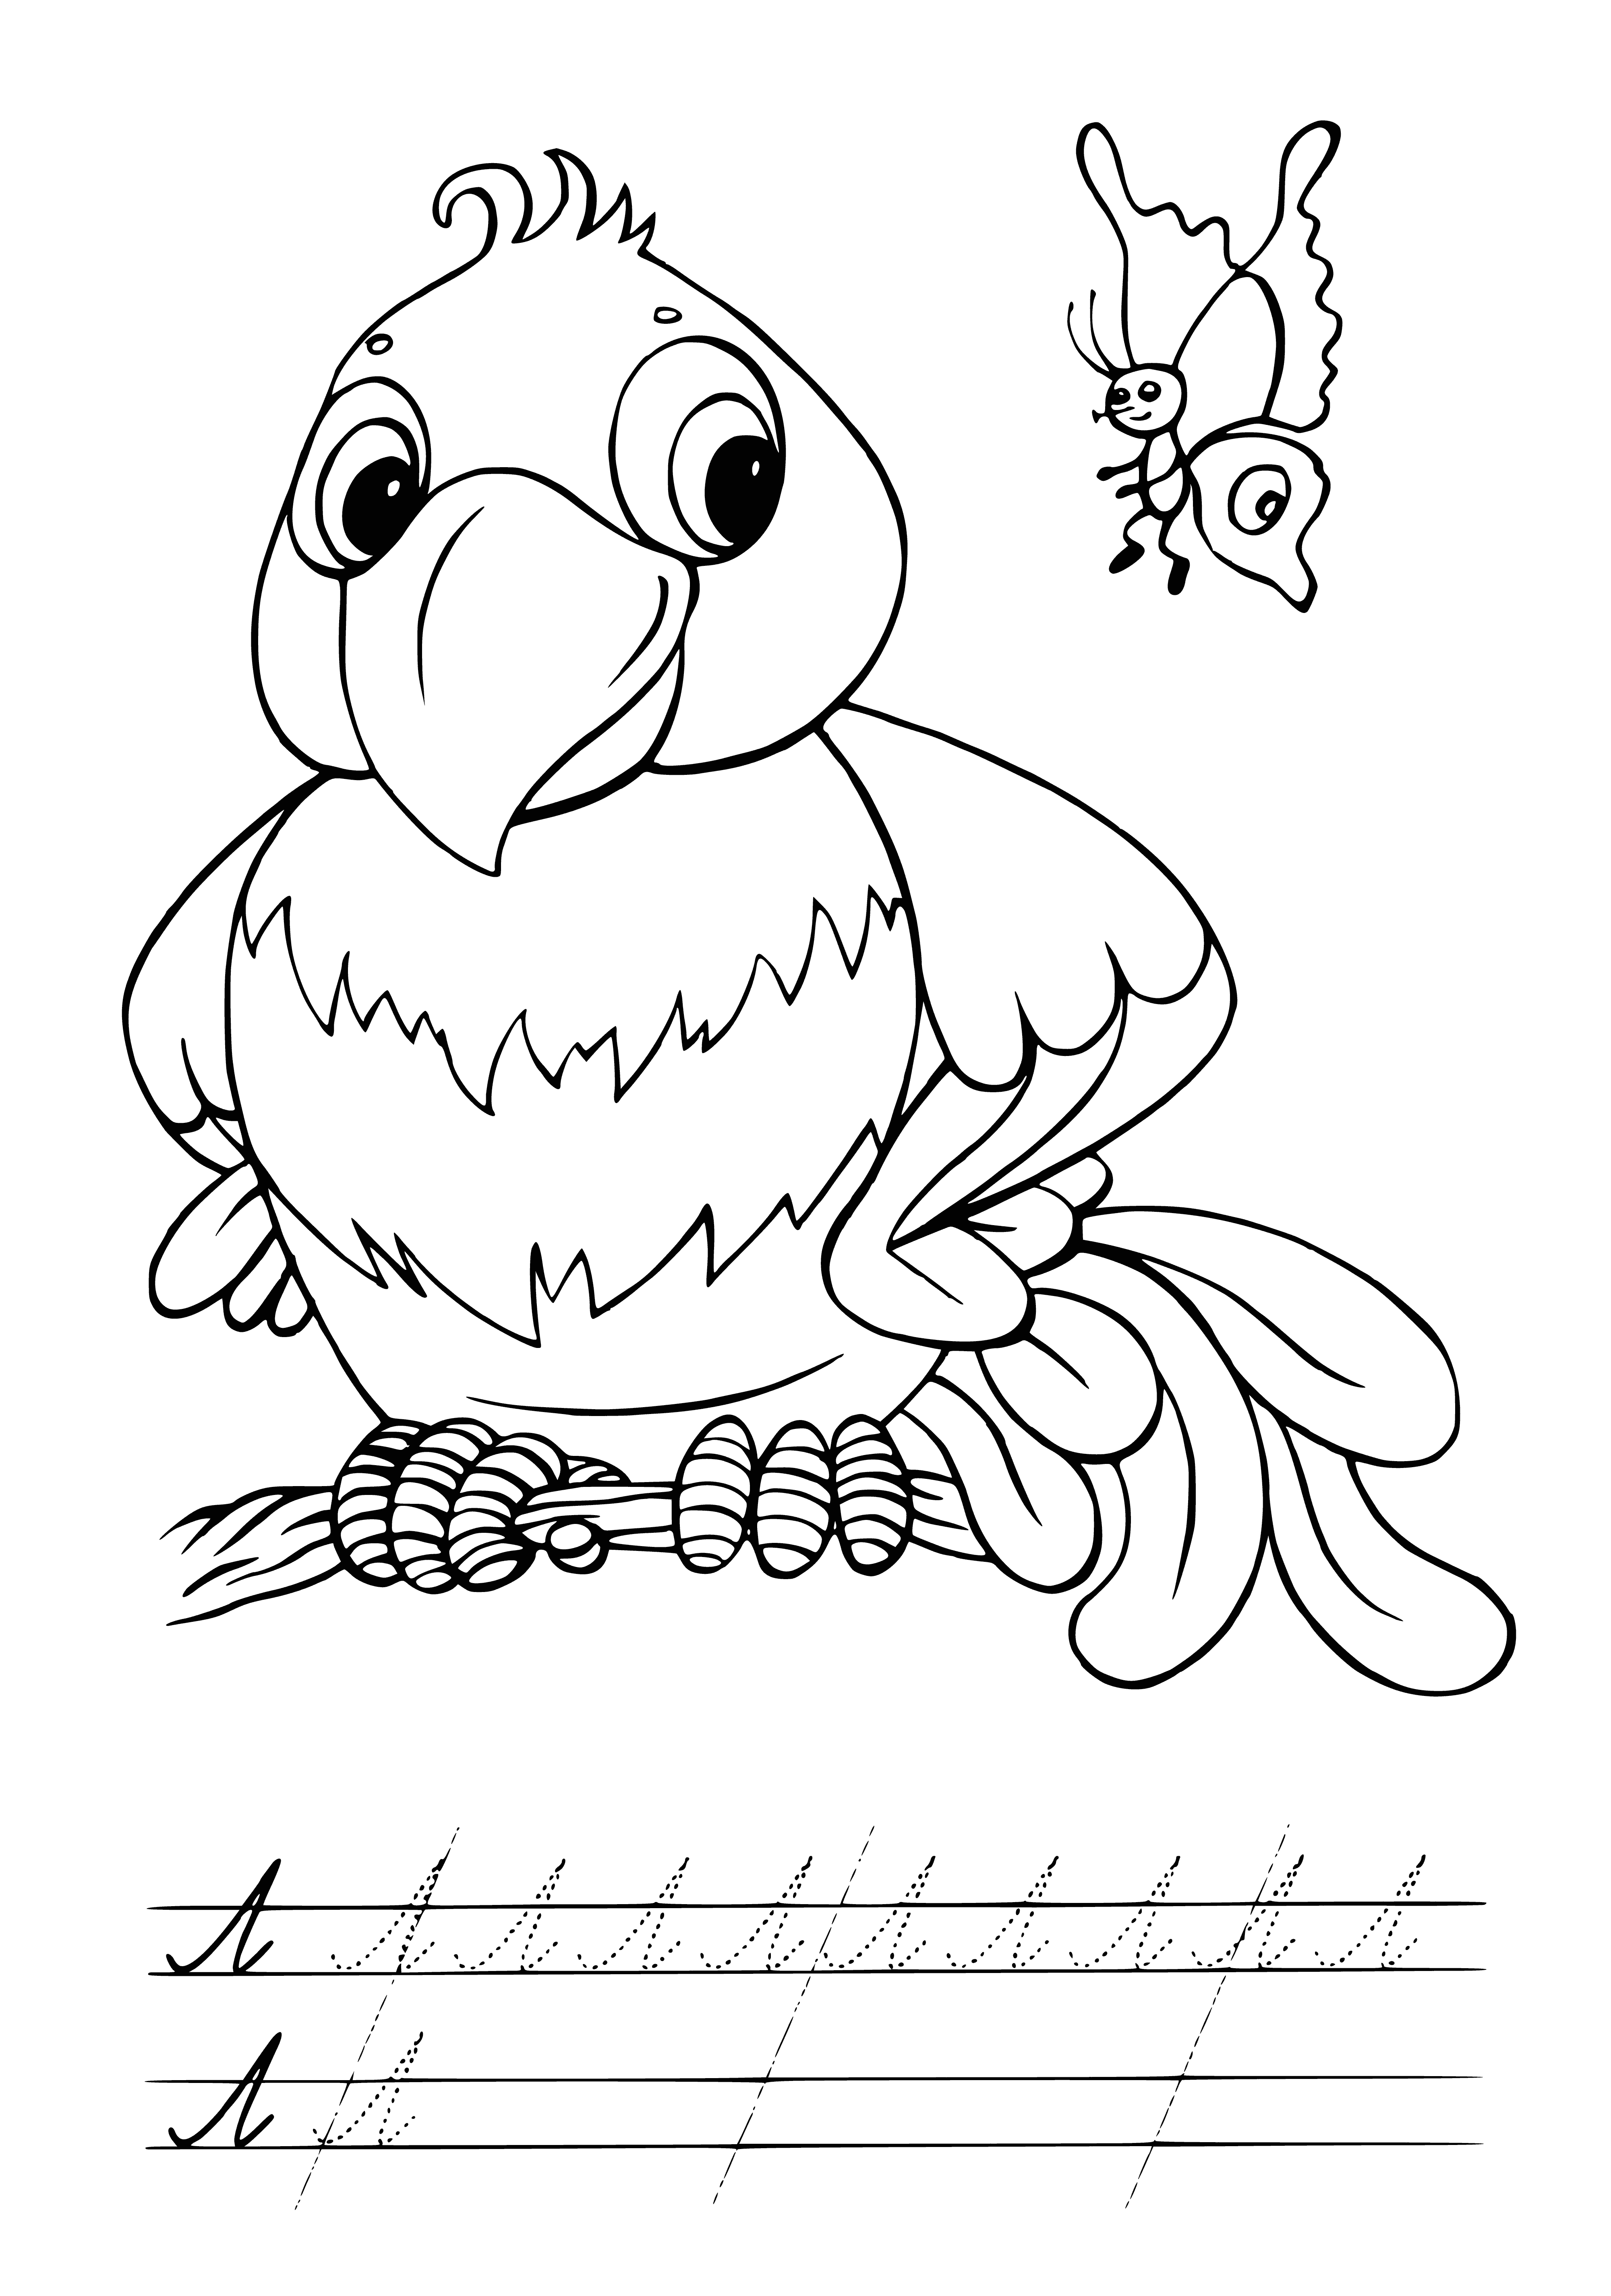 coloring page: Parrot with yellow/green feathers, black beak, and orange feet perched on branch. #birds